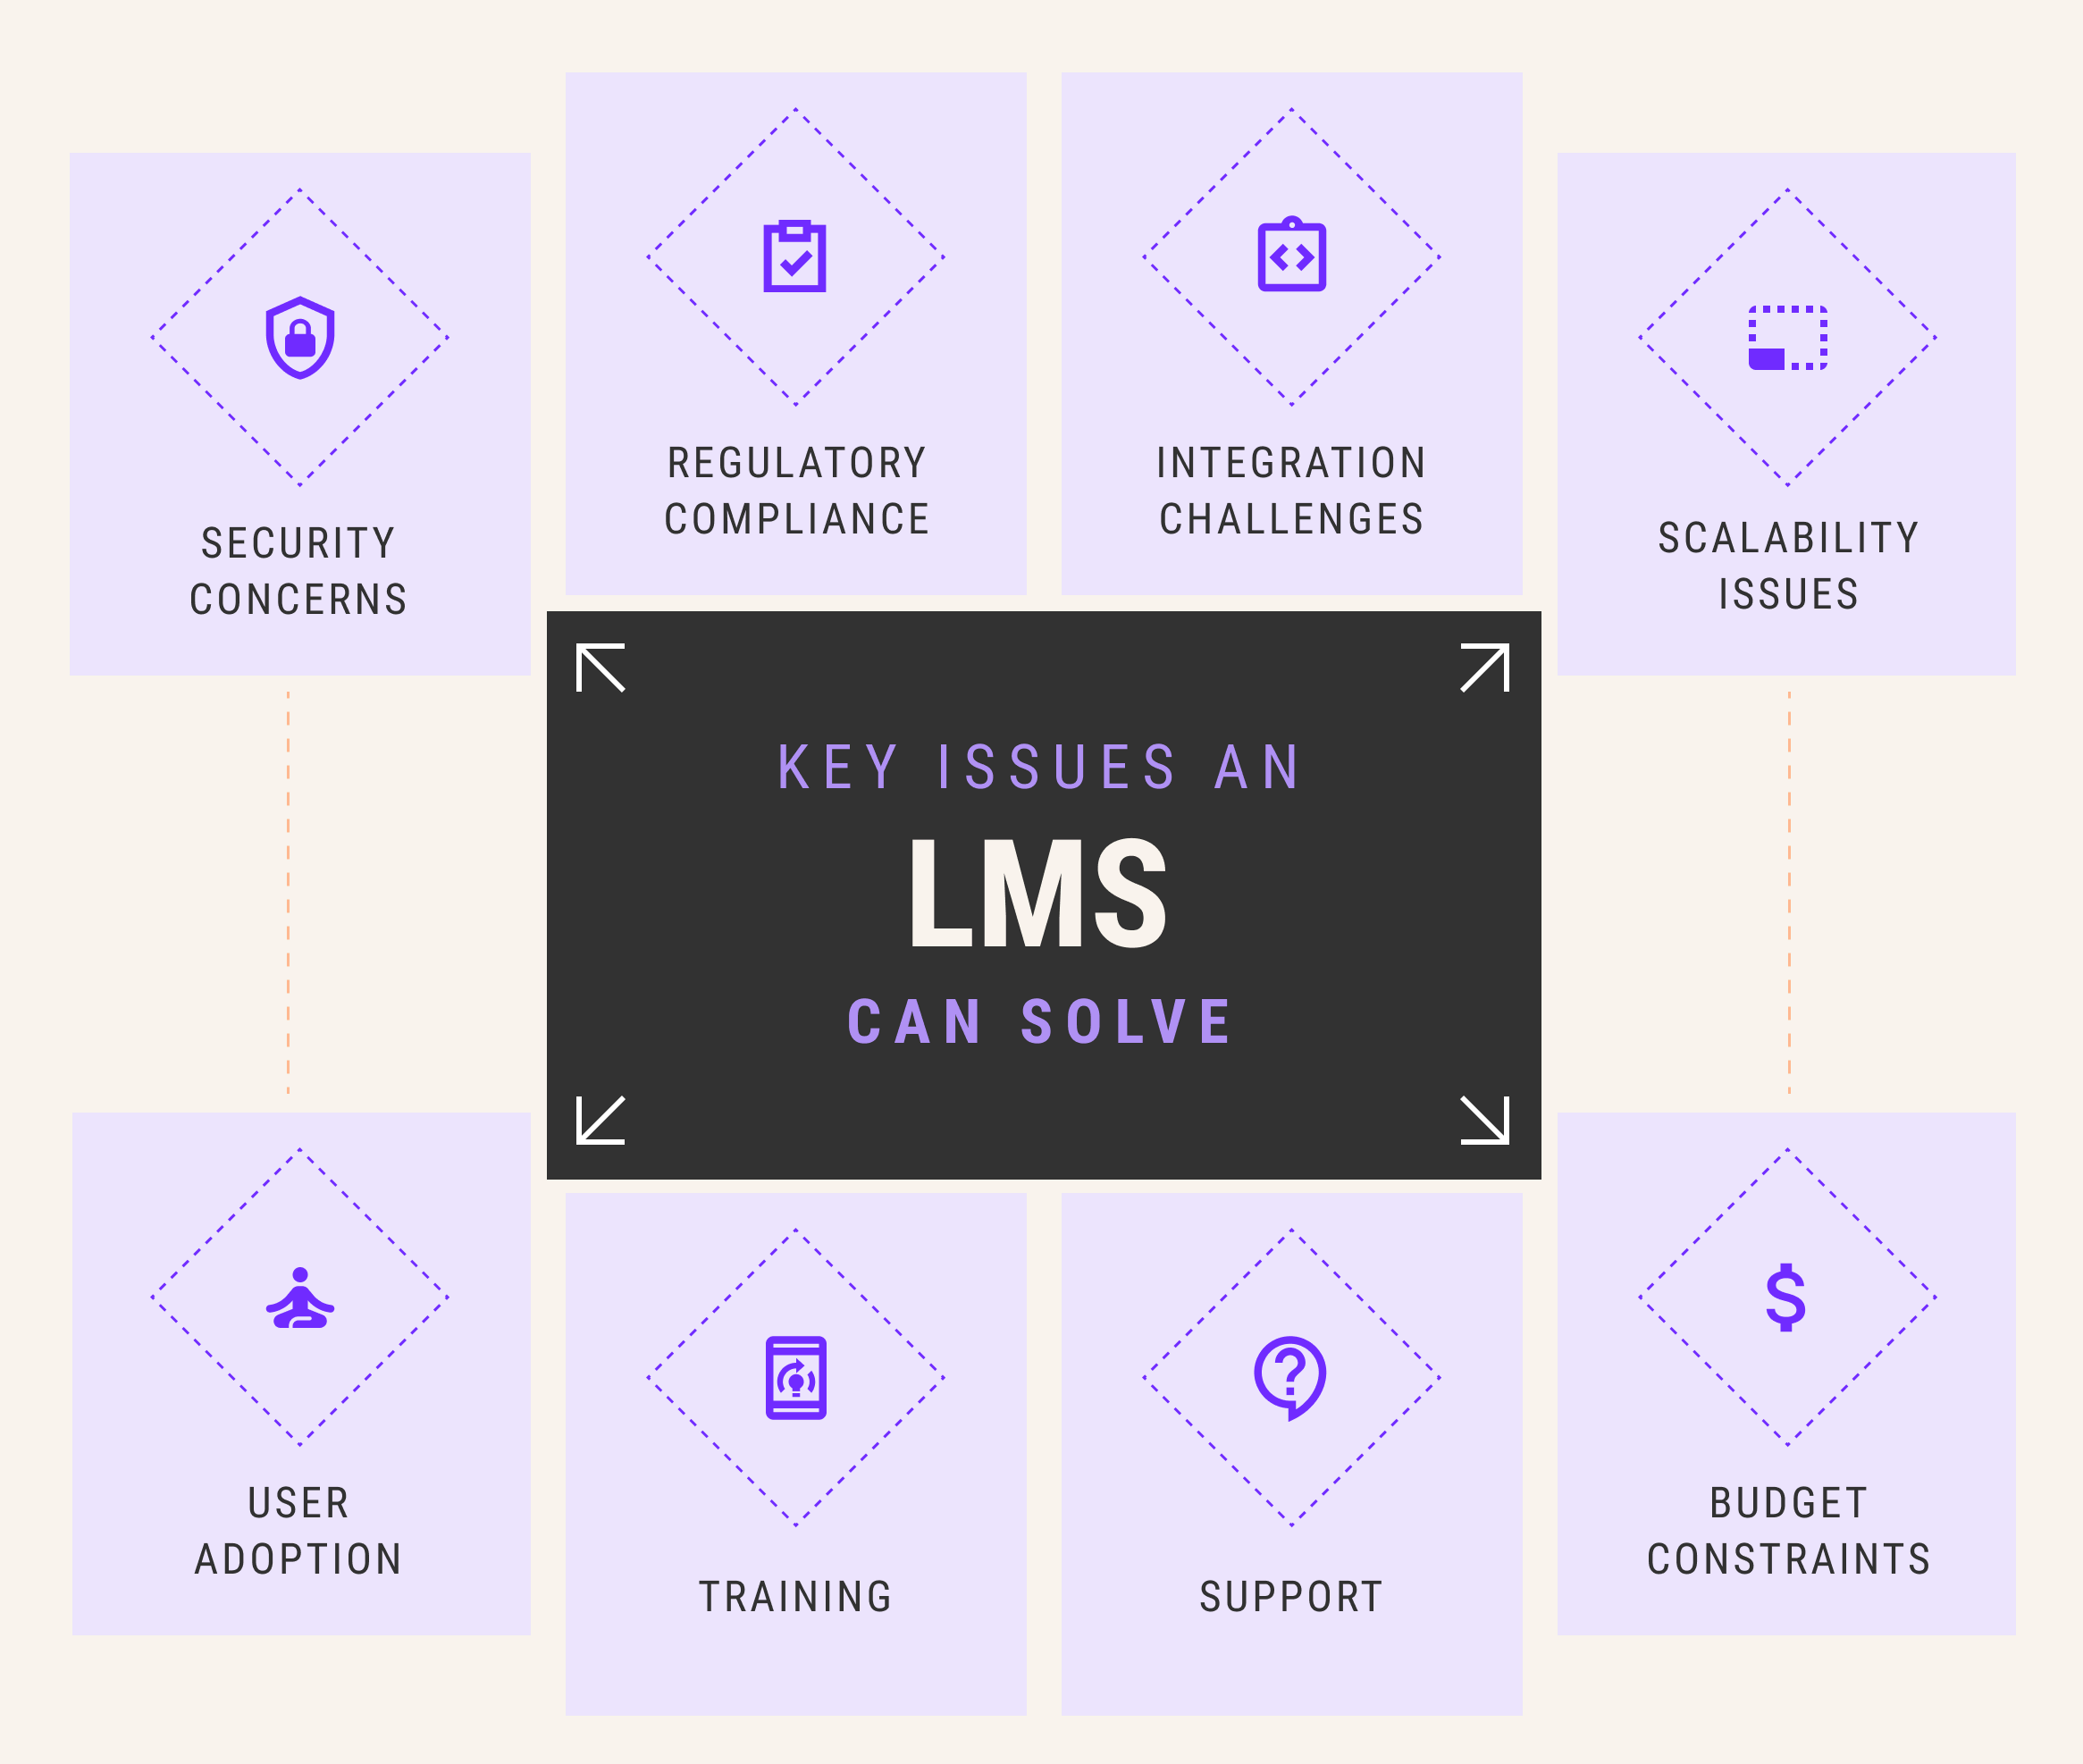 Key issues an LMS can solve